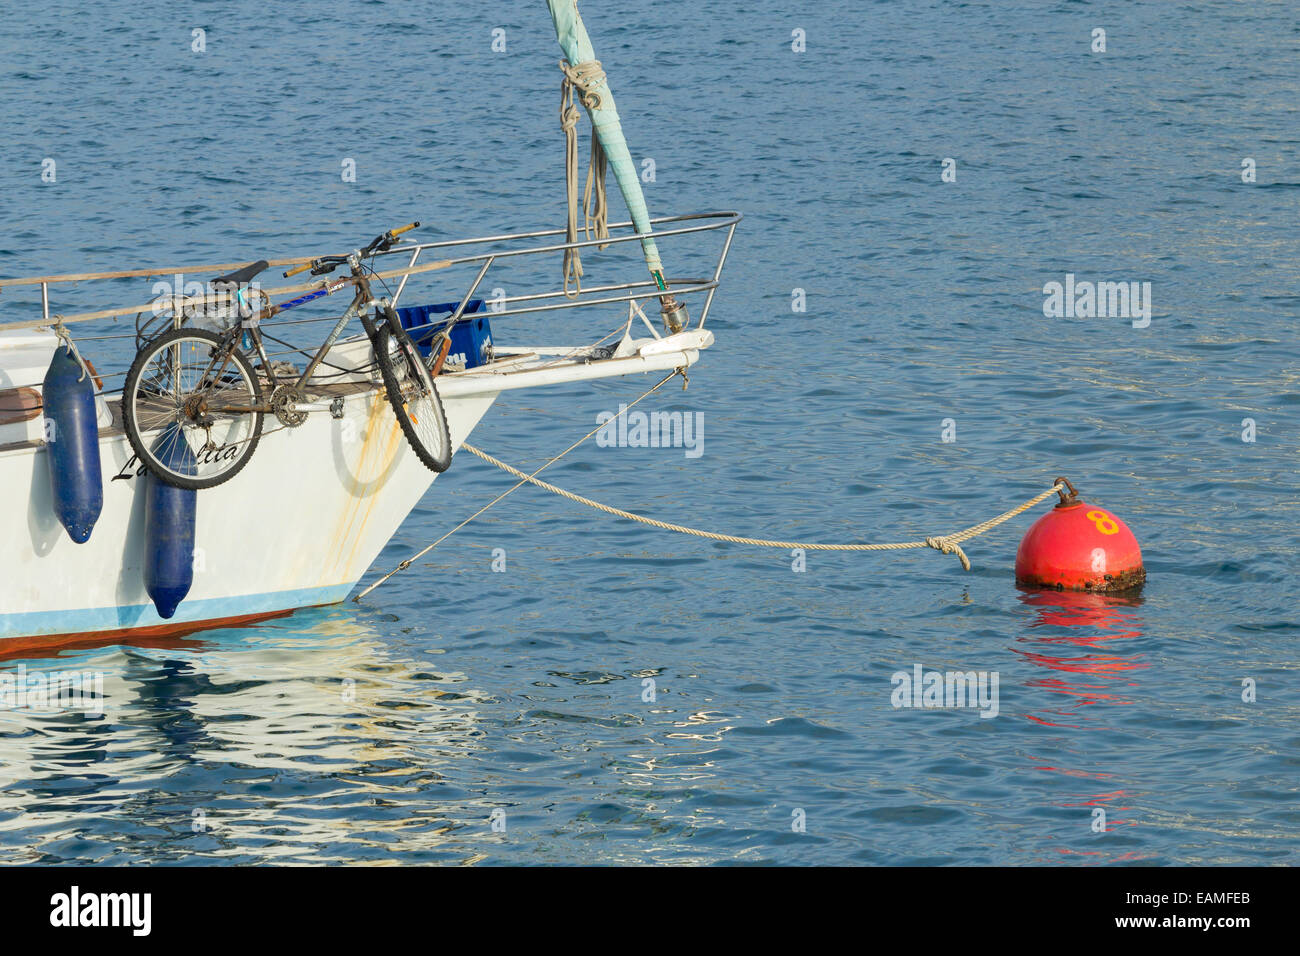 Mountain bike on bow of small yacht in Spain Stock Photo